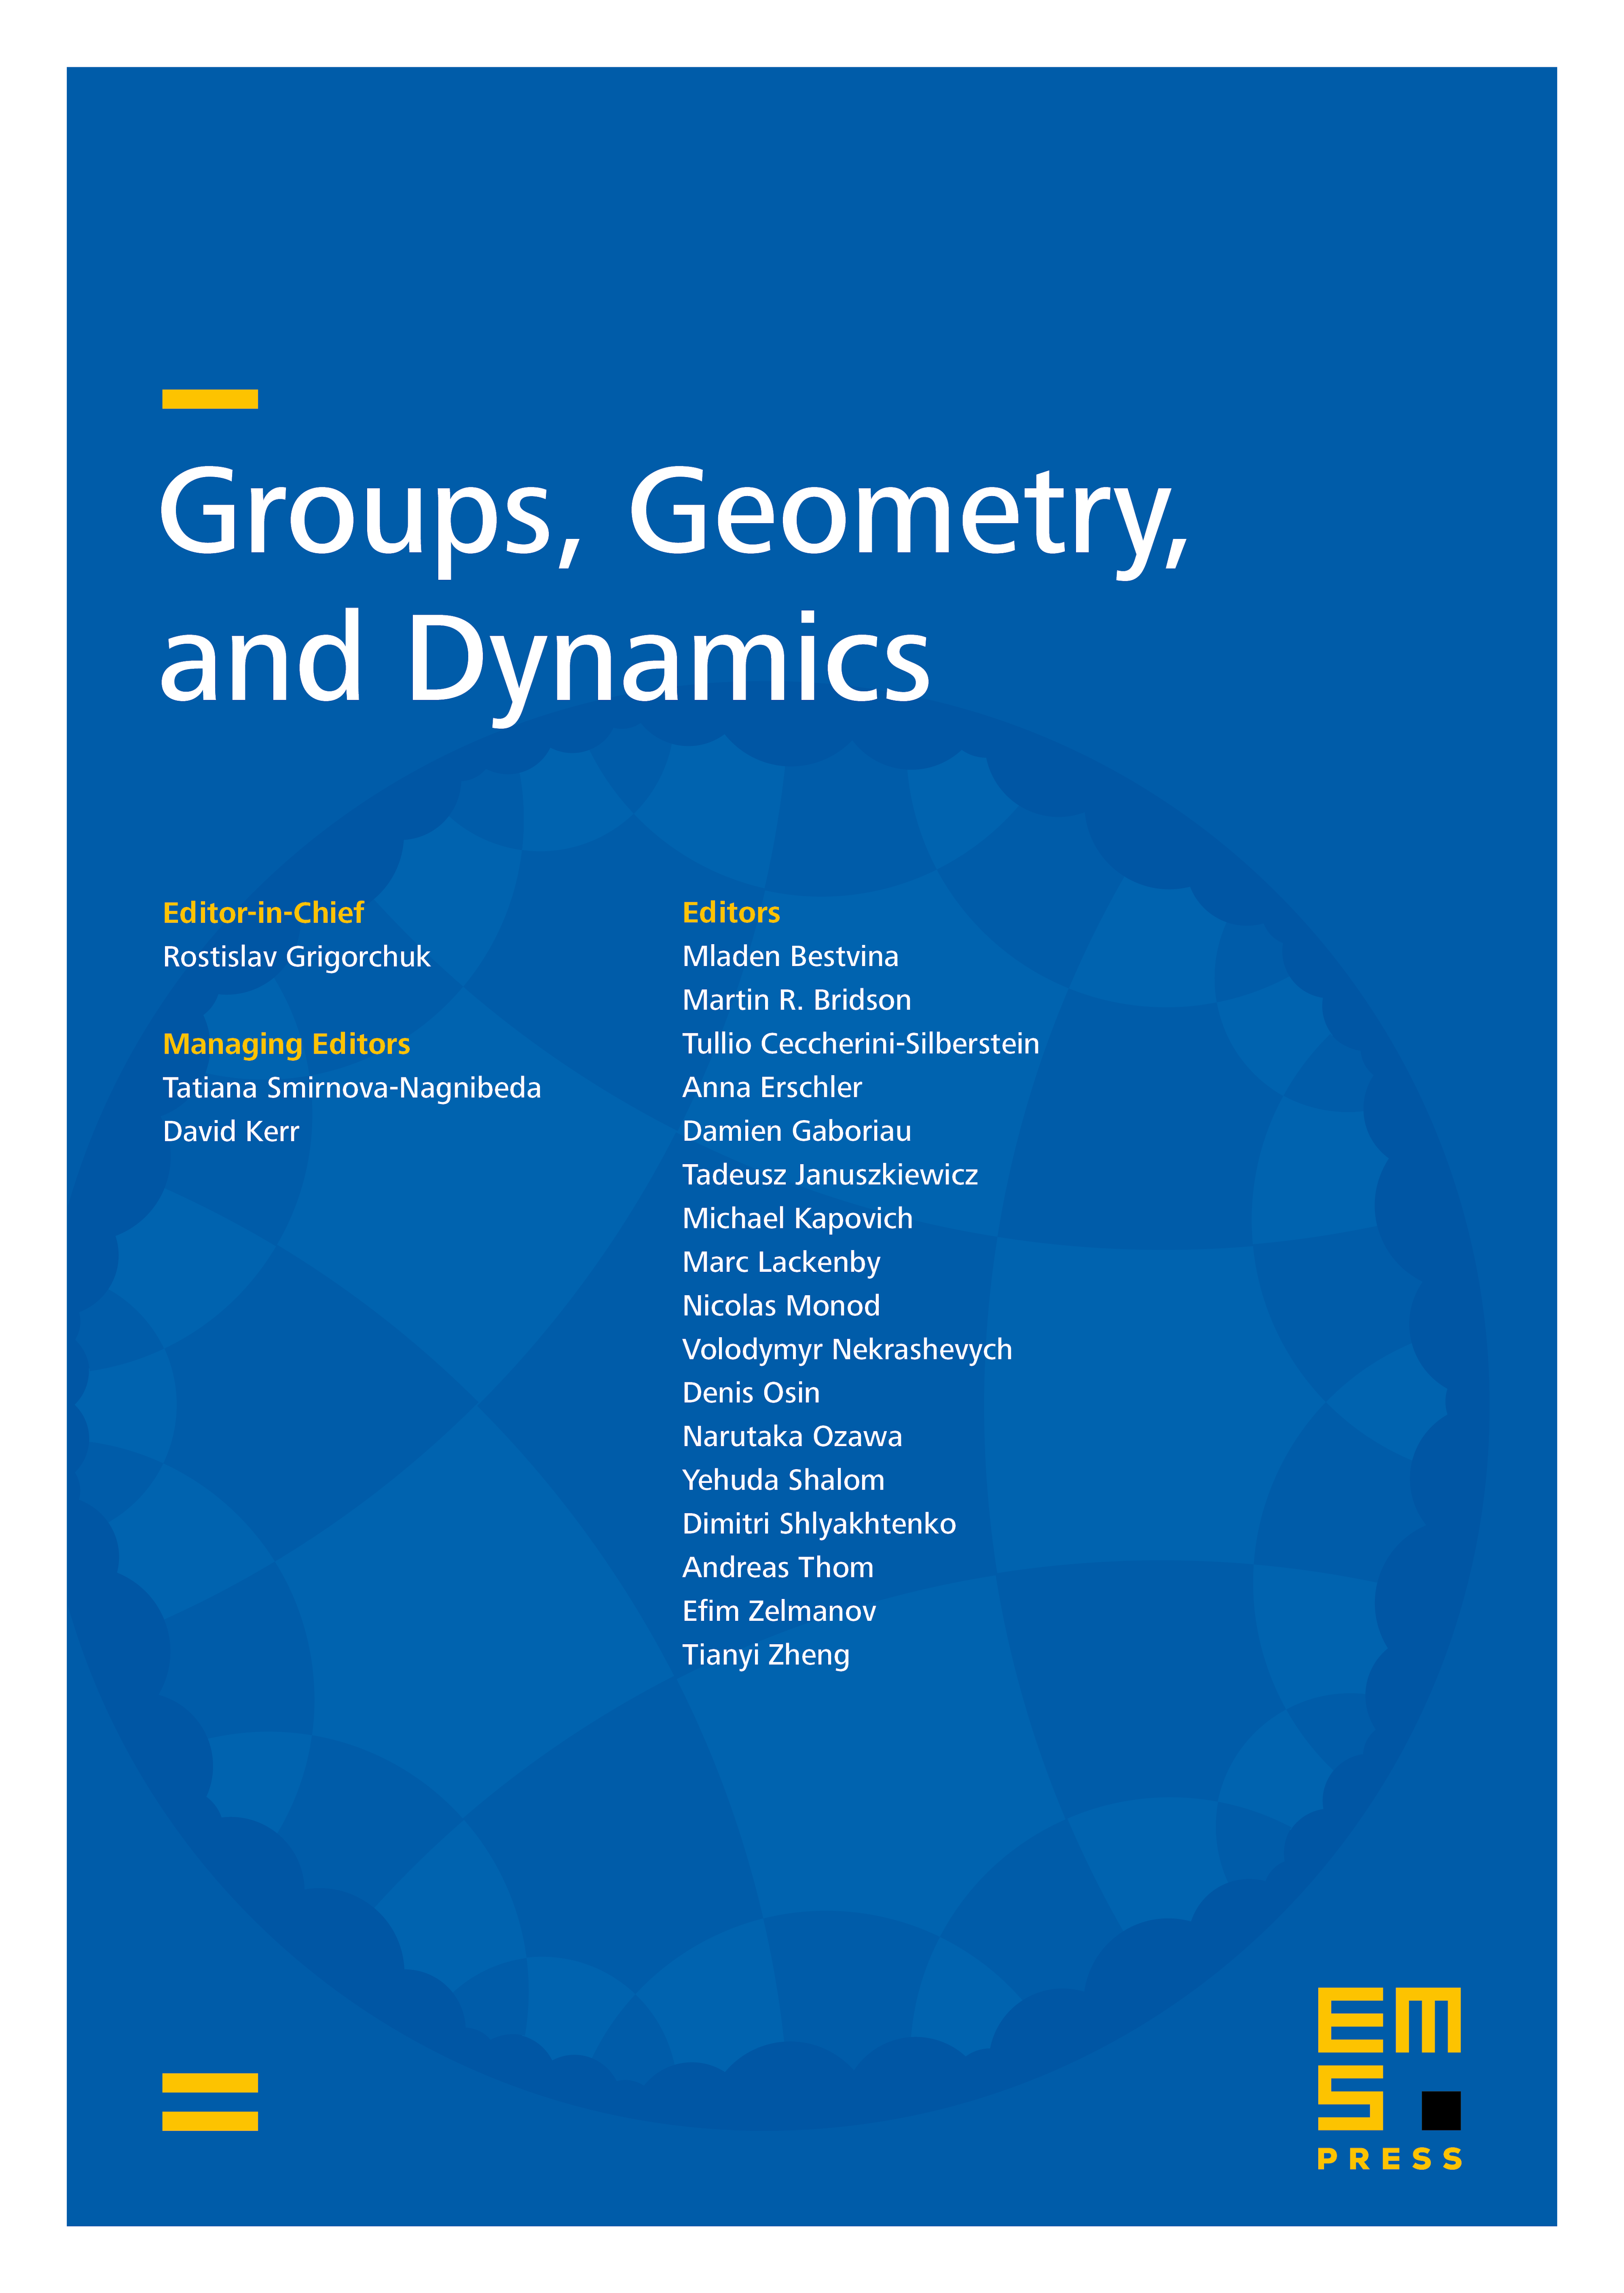 Geometry of locally compact groups of polynomial growth and shape of large balls cover